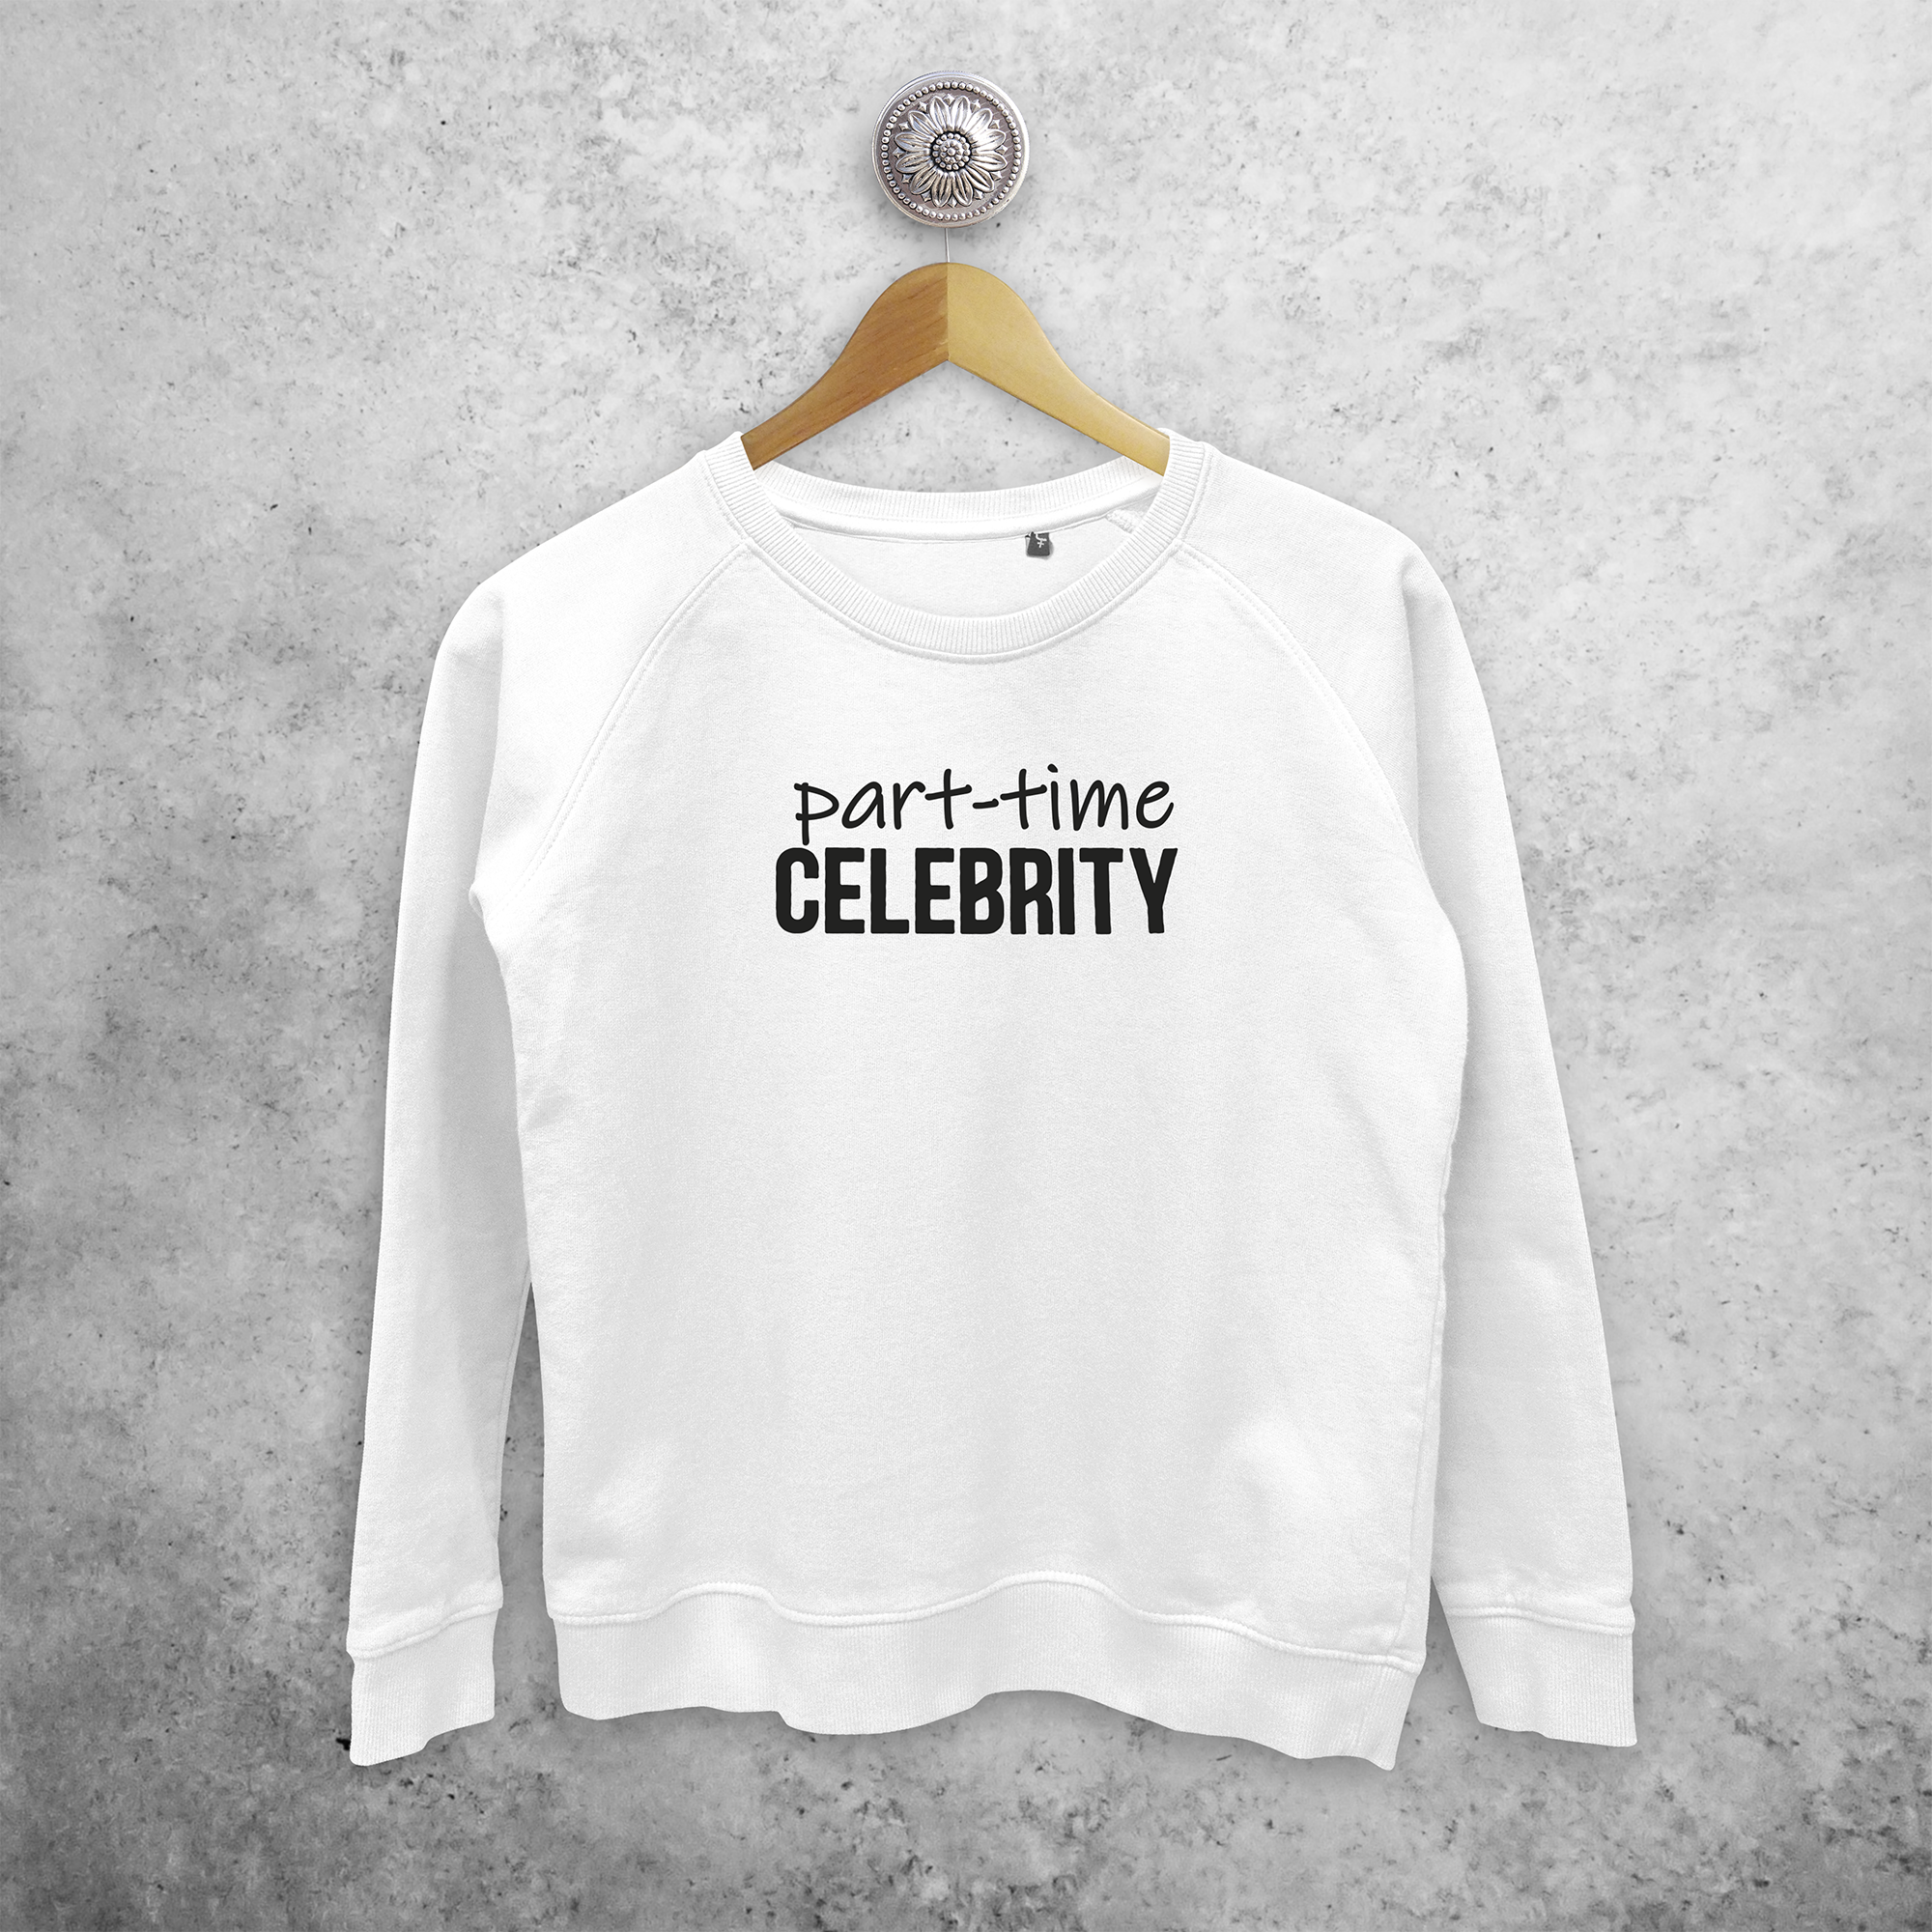 'Part-time celebrity' sweater